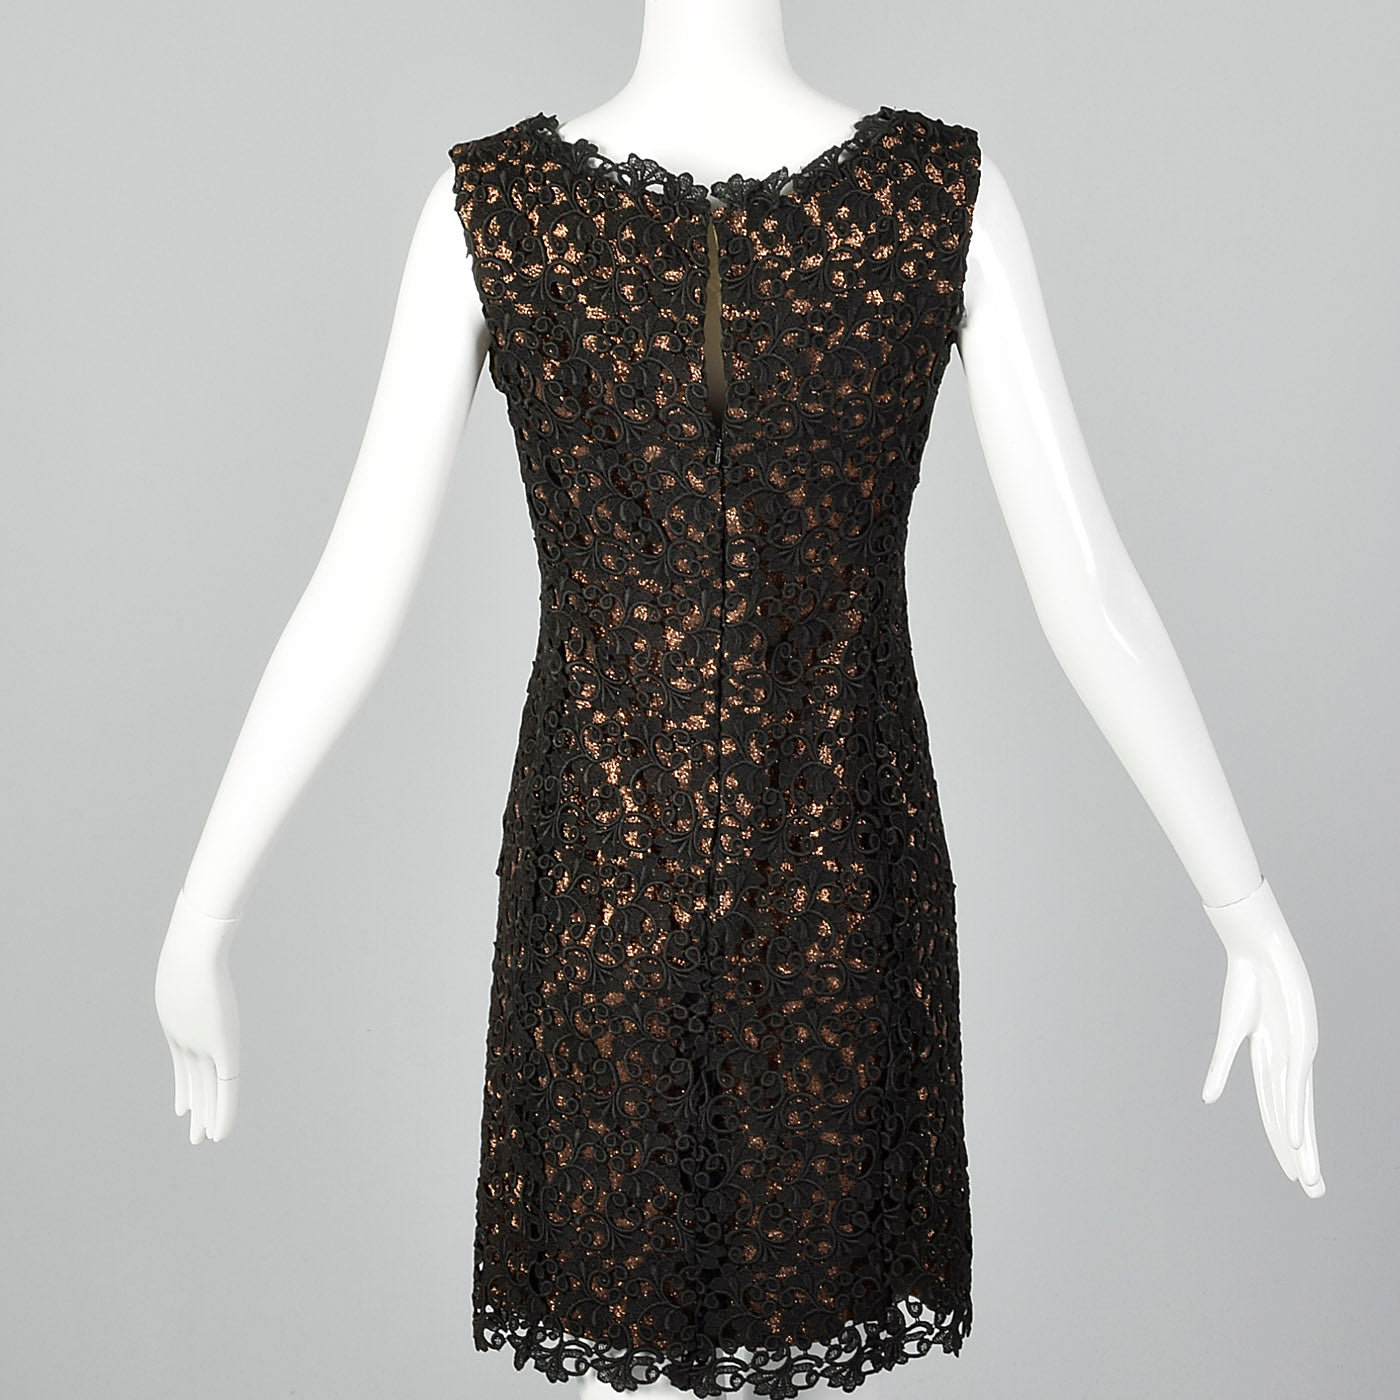 1960s Bronze Lurex Dress with Black Lace Overlay